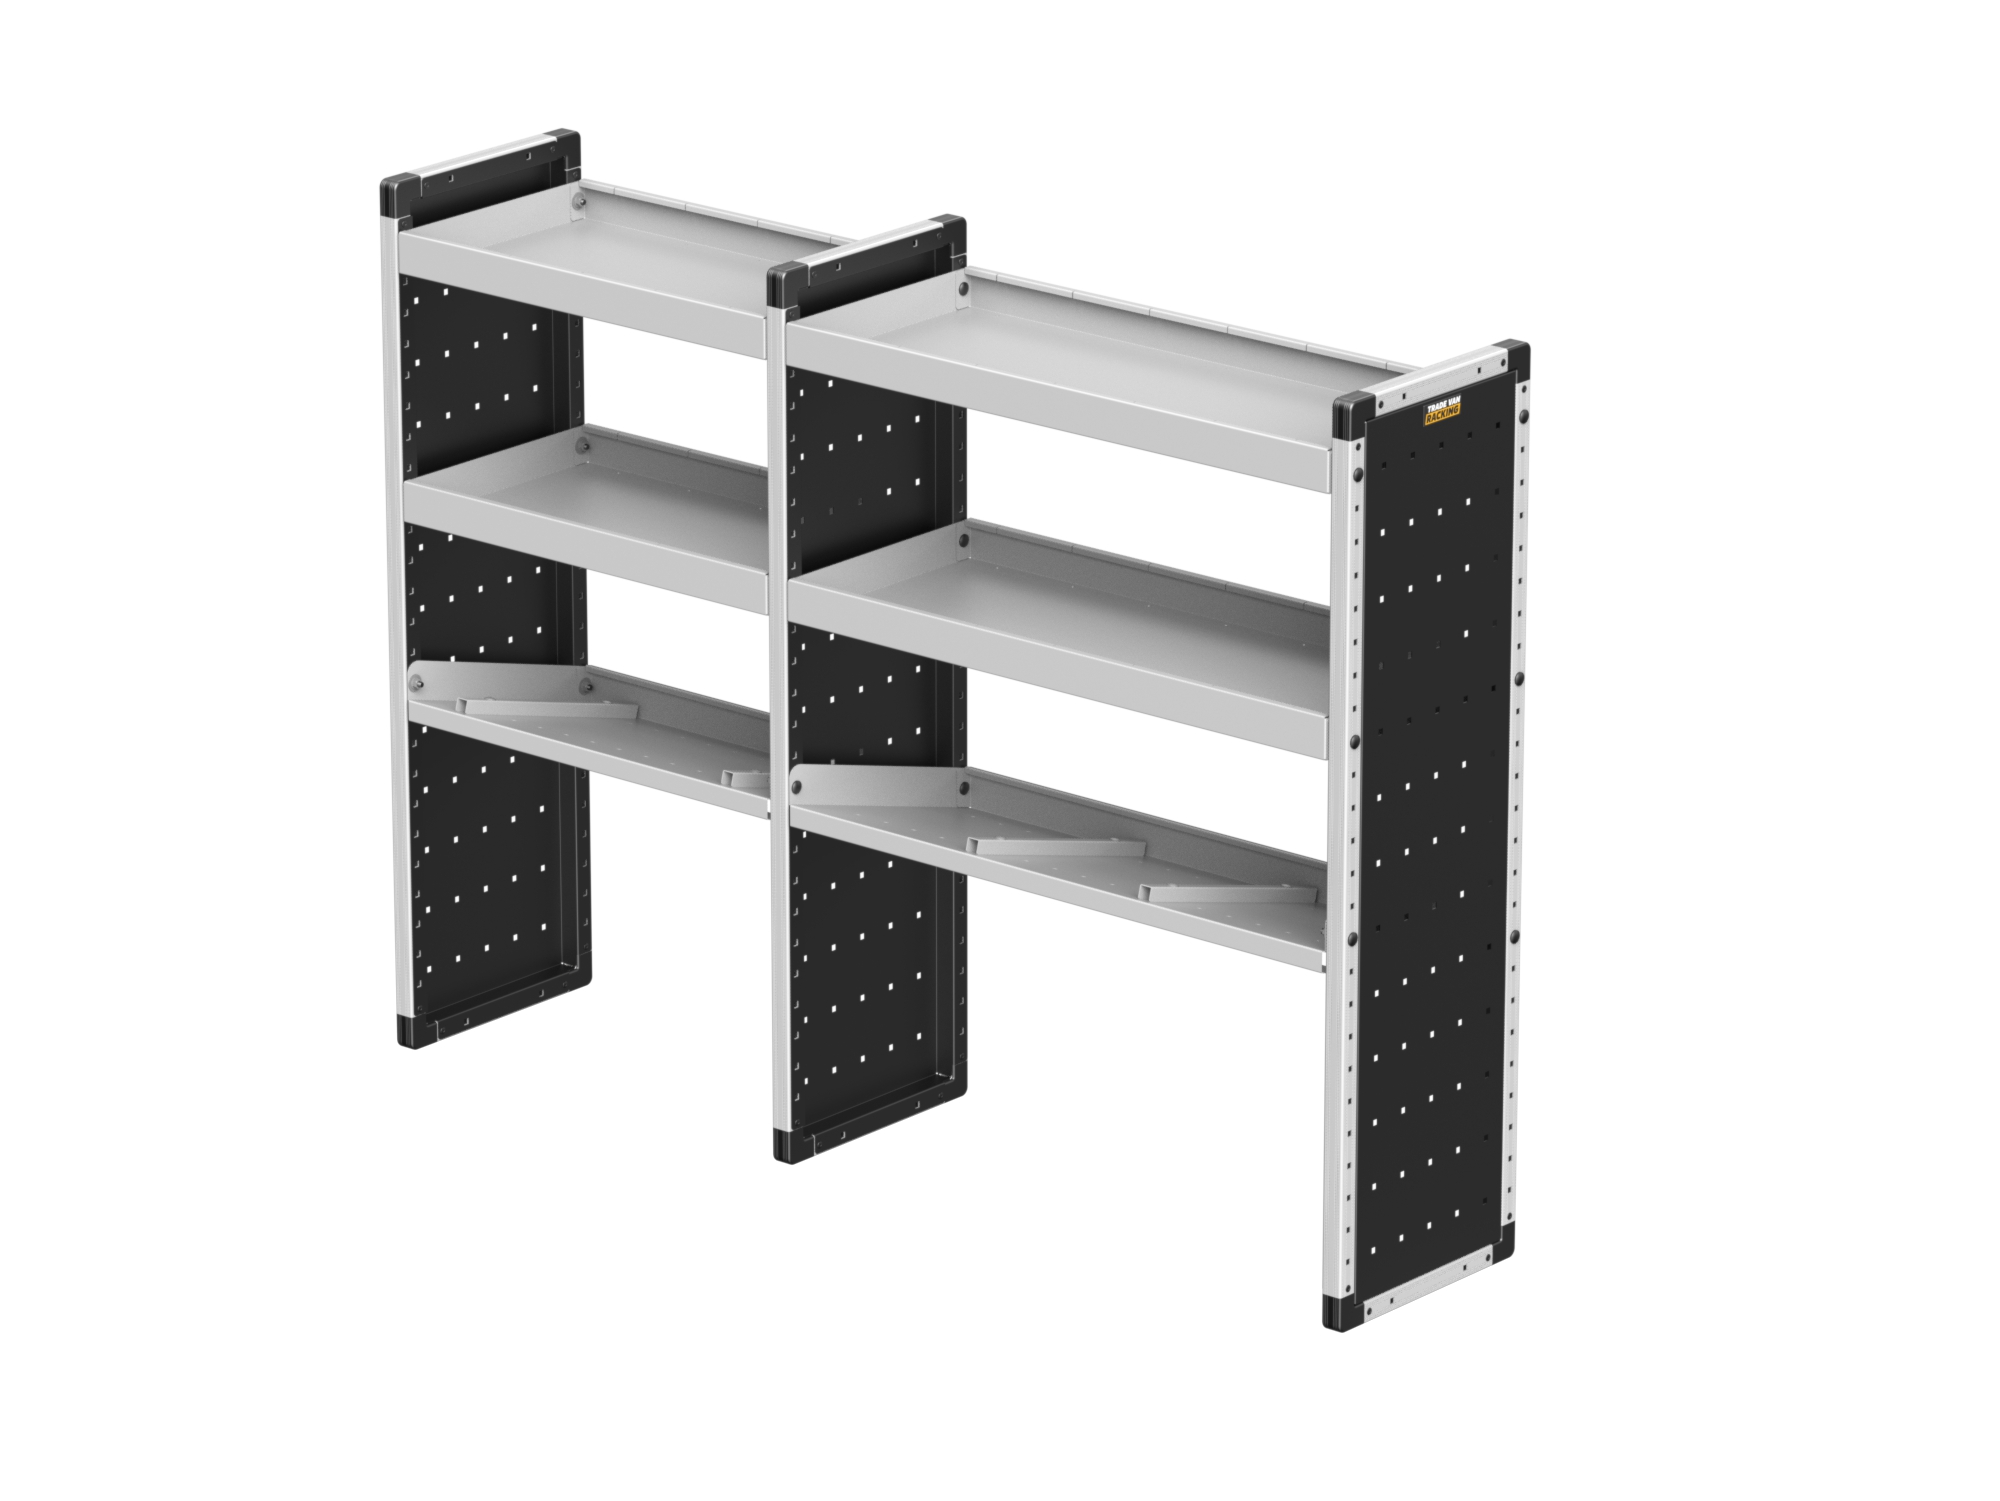 Trade Van Racking - Double Unit - 2 straight & 1 angled per bay - TVR-DBL-008